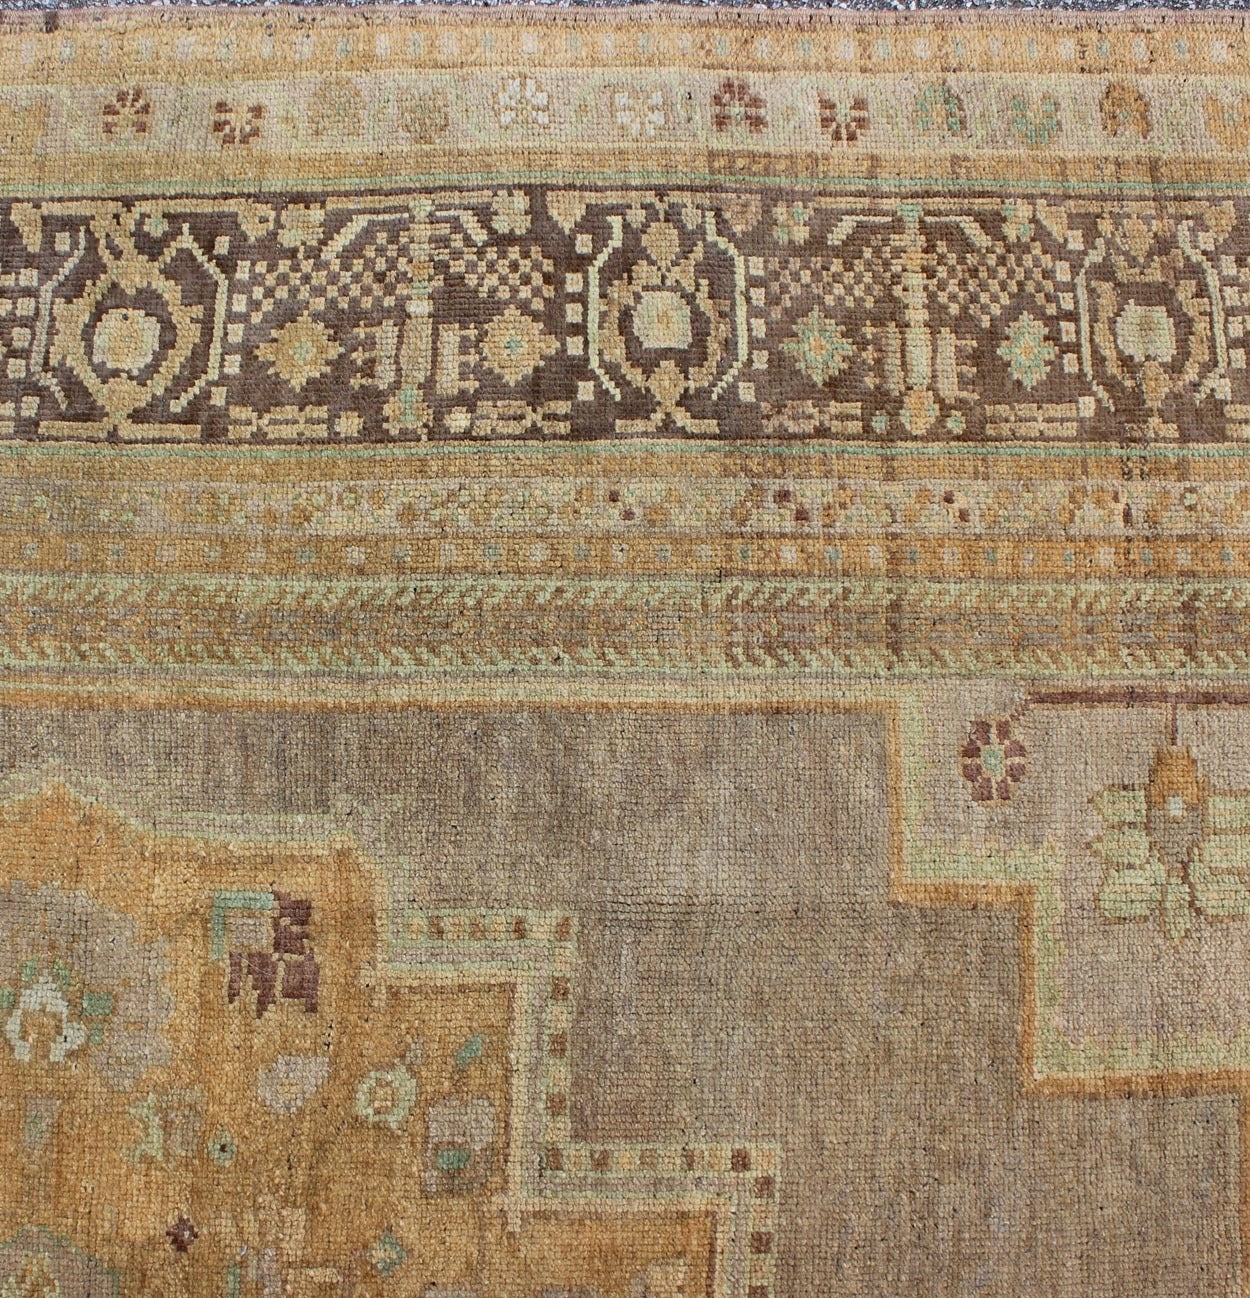 Turkish Oushak Rug with gold, brown and gray